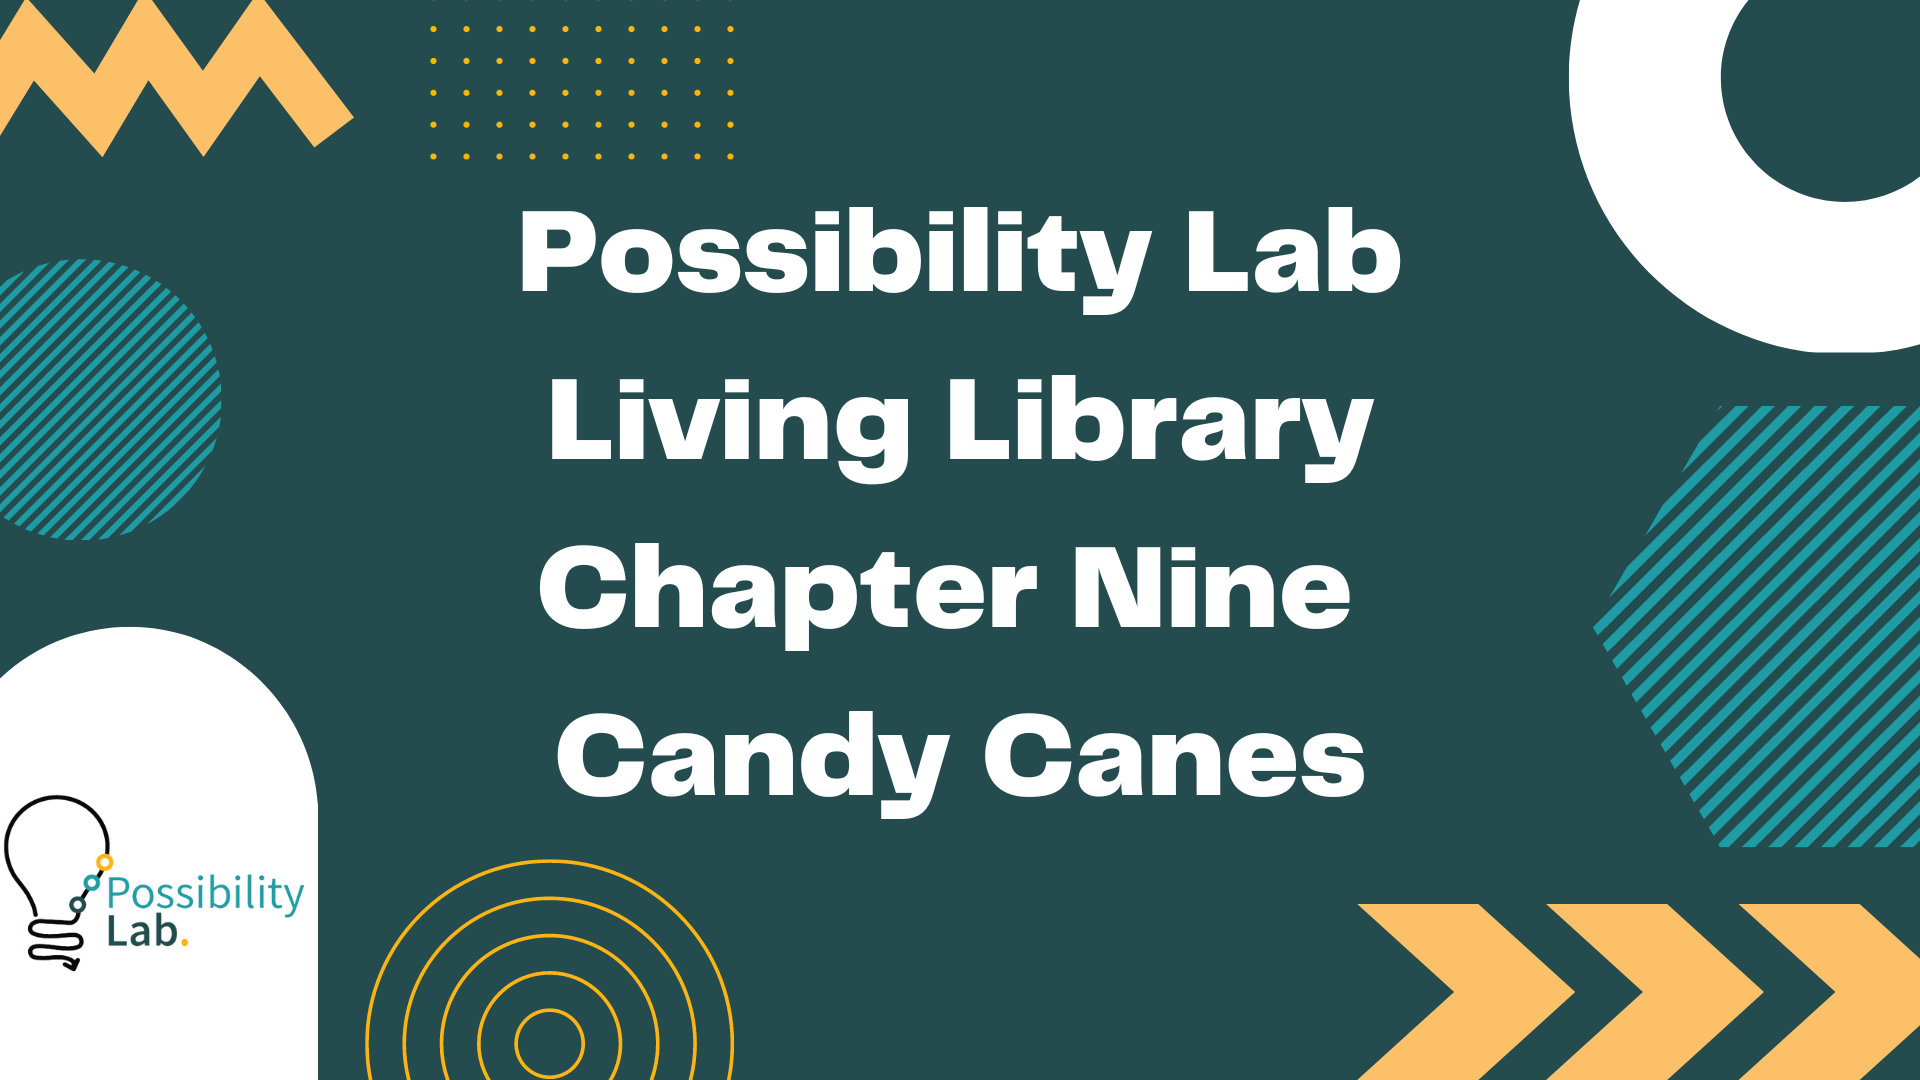 A slide from our living library videos. It has a green background and squiggle designs in white, lighter green and orange. The possibility lab logo is on the bottom left and text on the slide reads Possibility Lab Living Library Chapter Nine Candy Canes